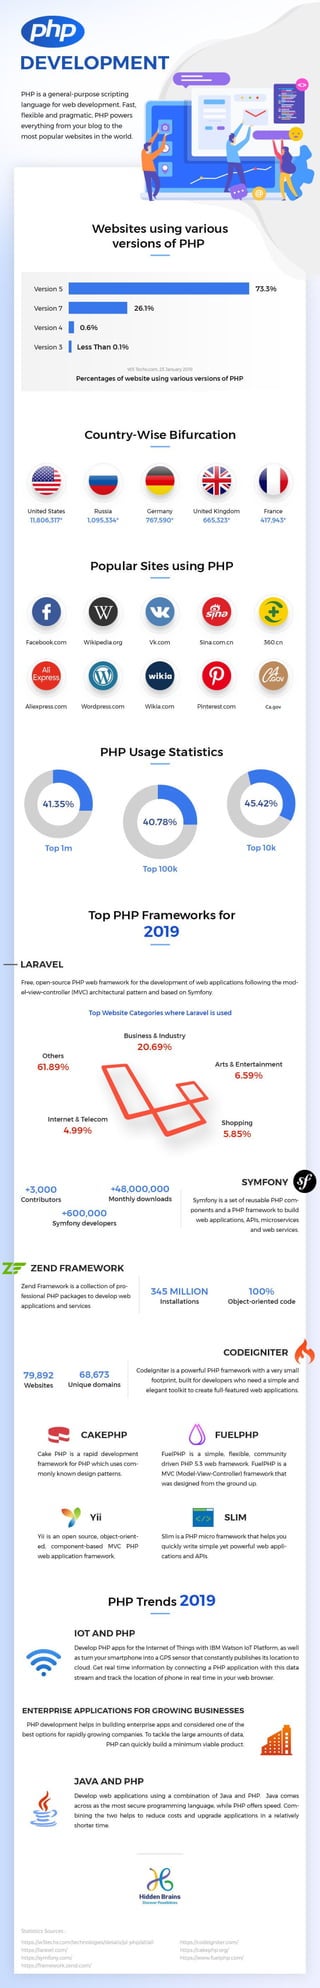 Php development trends and Frameworks